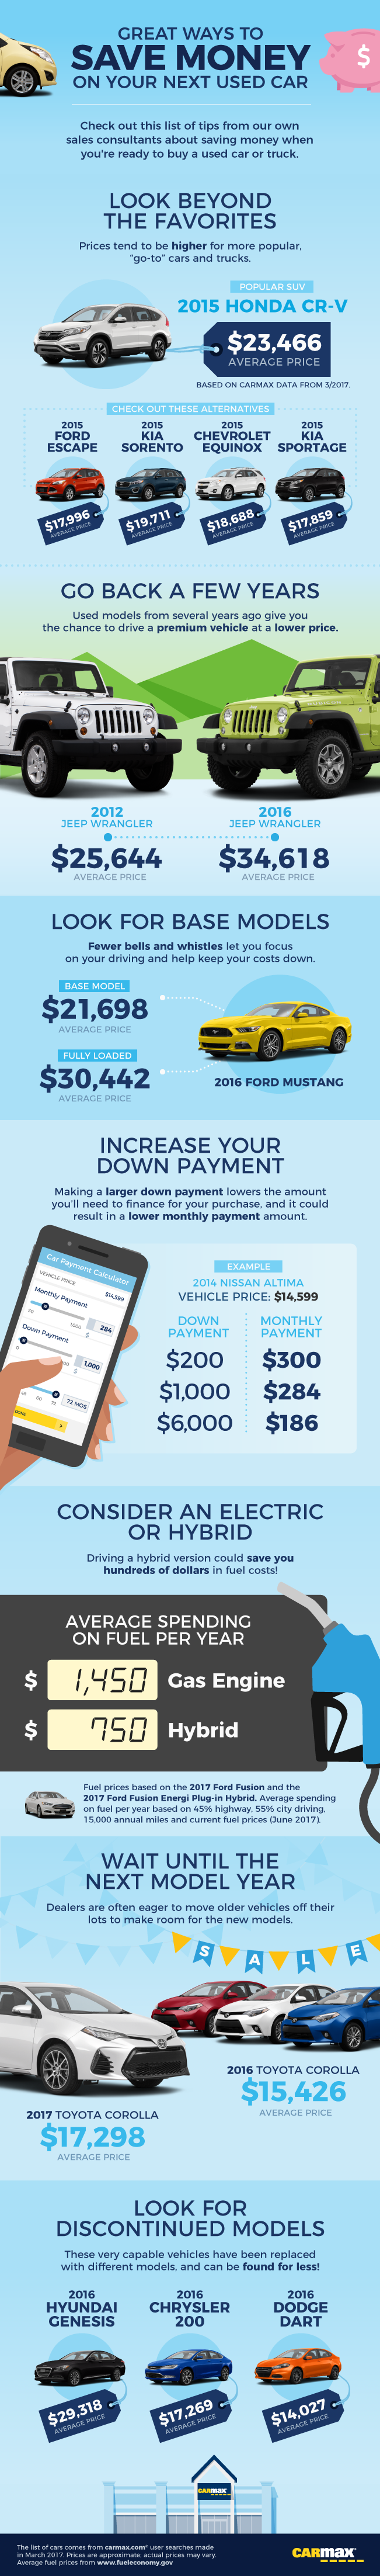 Great Ways to Save Money on Your Next Car | CarMax